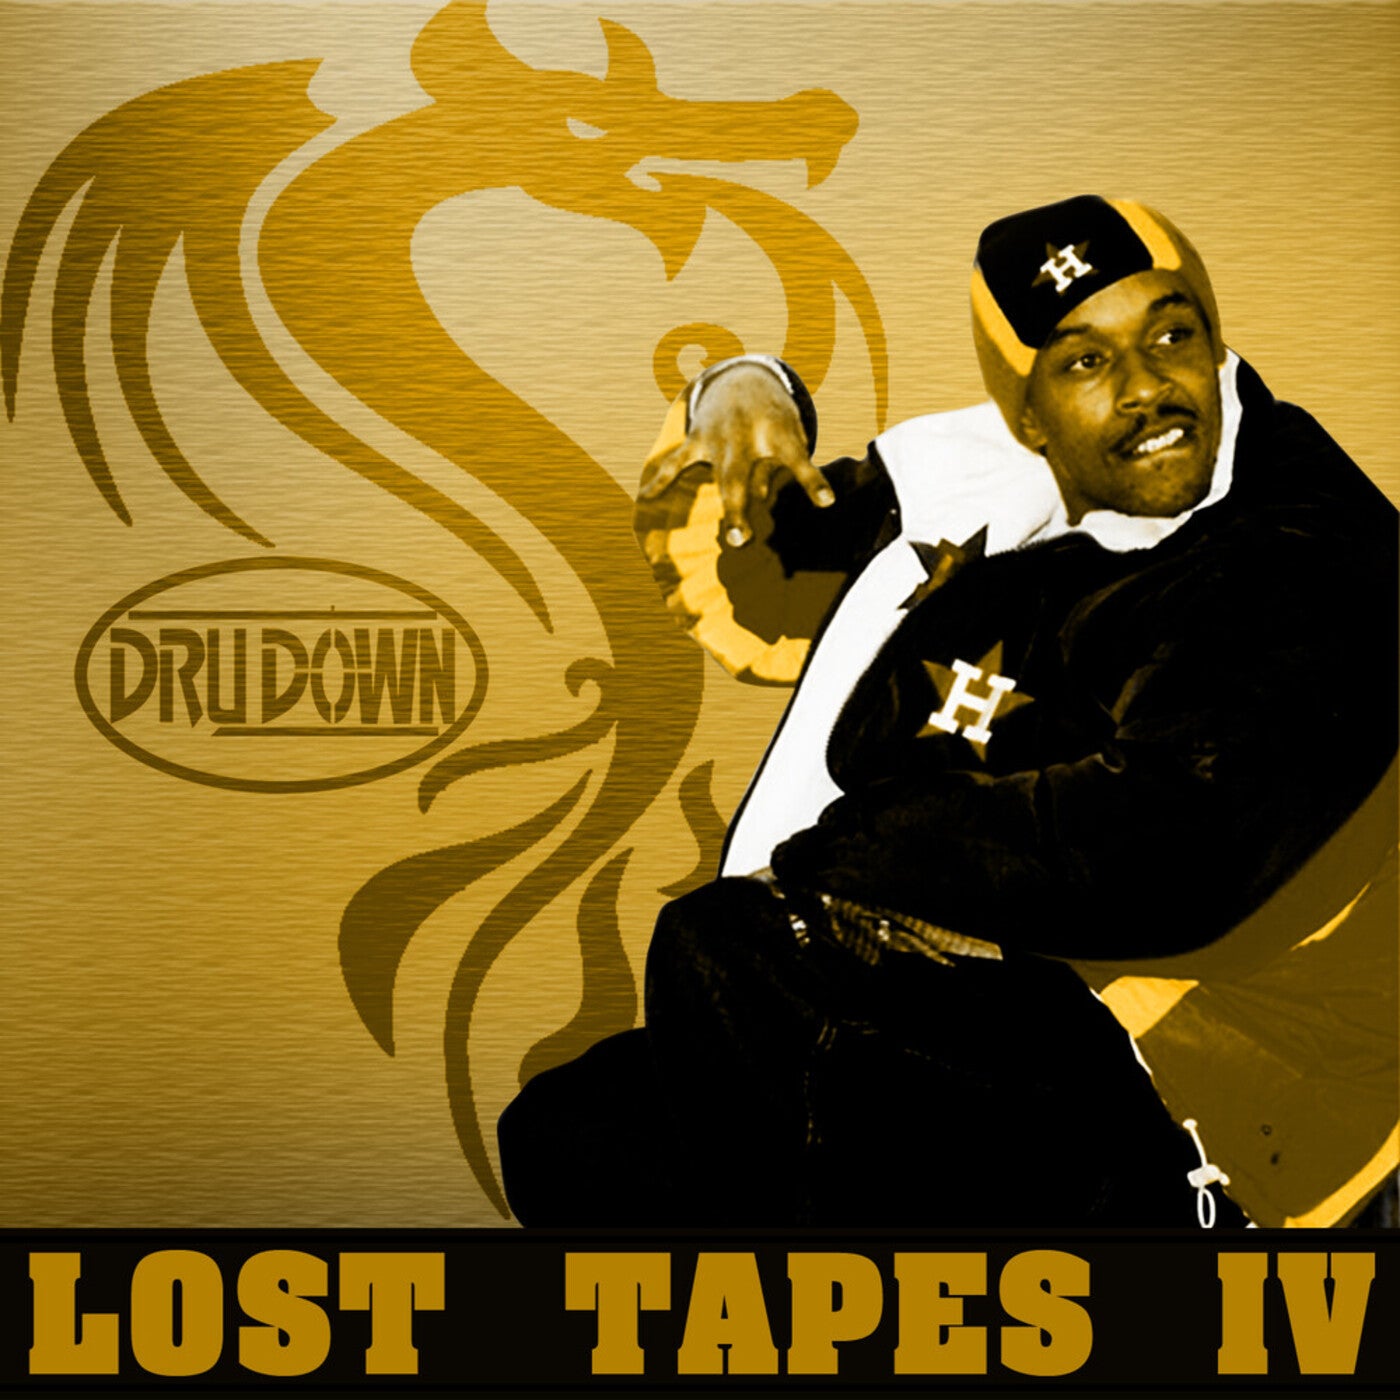 Soldier Side альбом. Nas the Lost Tapes. Yukmouth. The game da bitch.